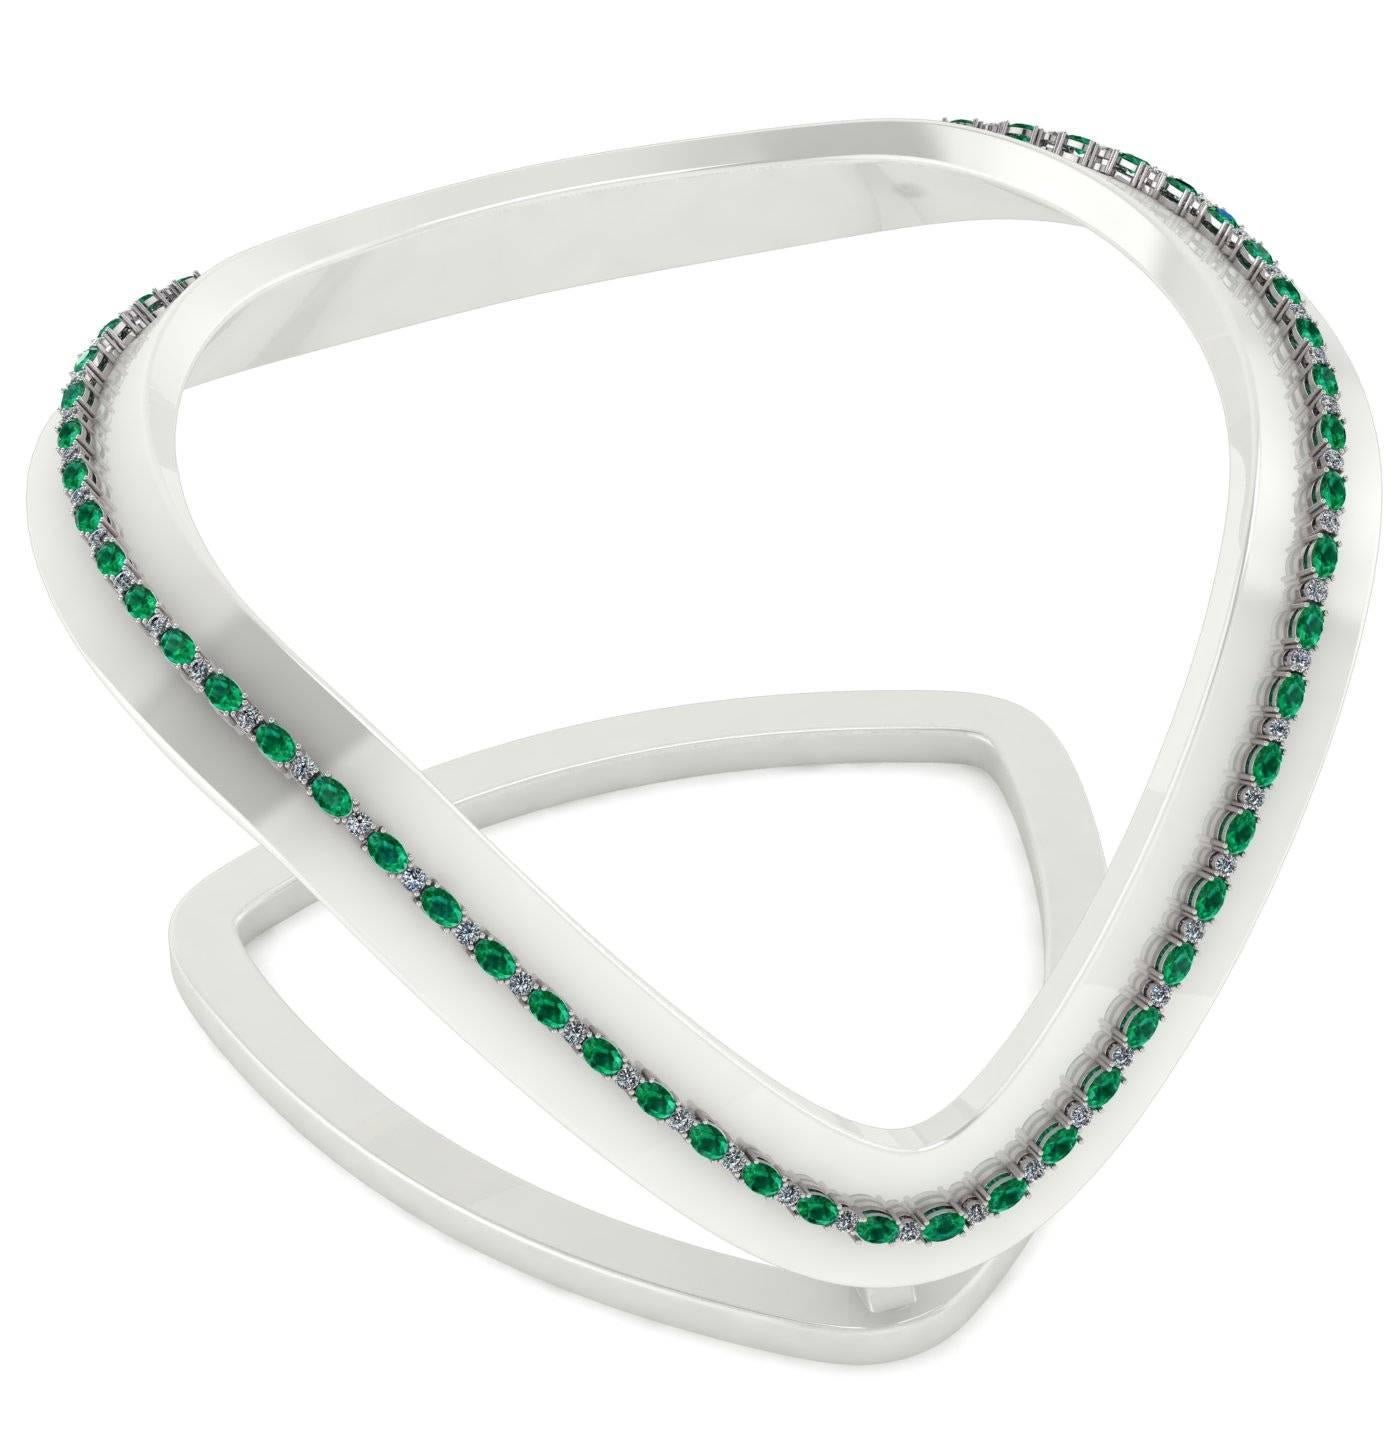 INTRODUCING OUR STUNNING EMERALD AND DIAMOND TENNIS NECKLACE  

Beautiful and precious! Emerald is the sacred gem of the world. It is symbolizing life, rejuvenation and balance Discover the natural beauty of this mysterious gemstone with our chic